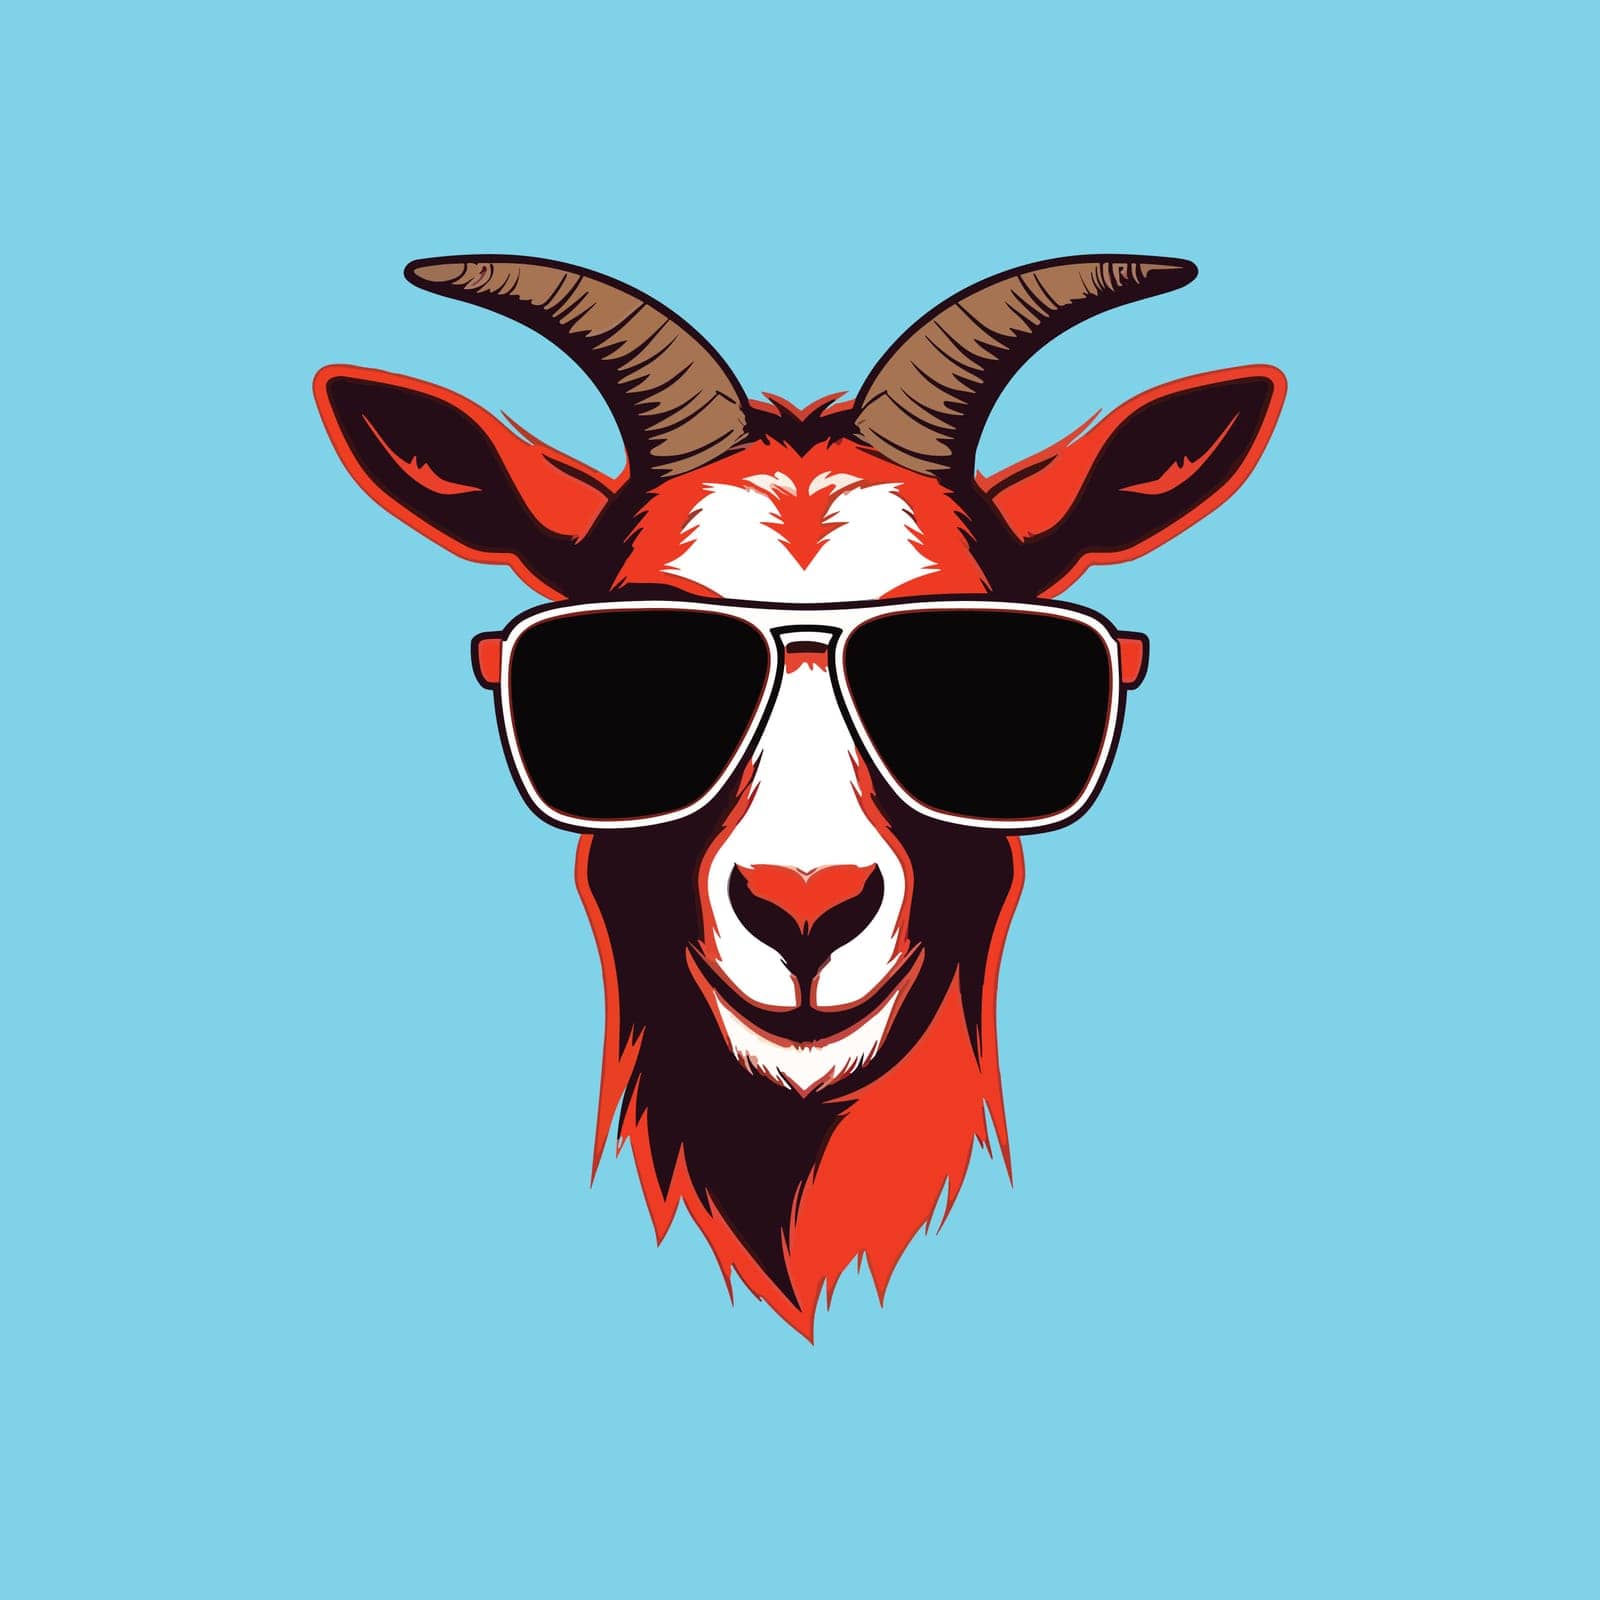 Portrait of Goat with sunglasses